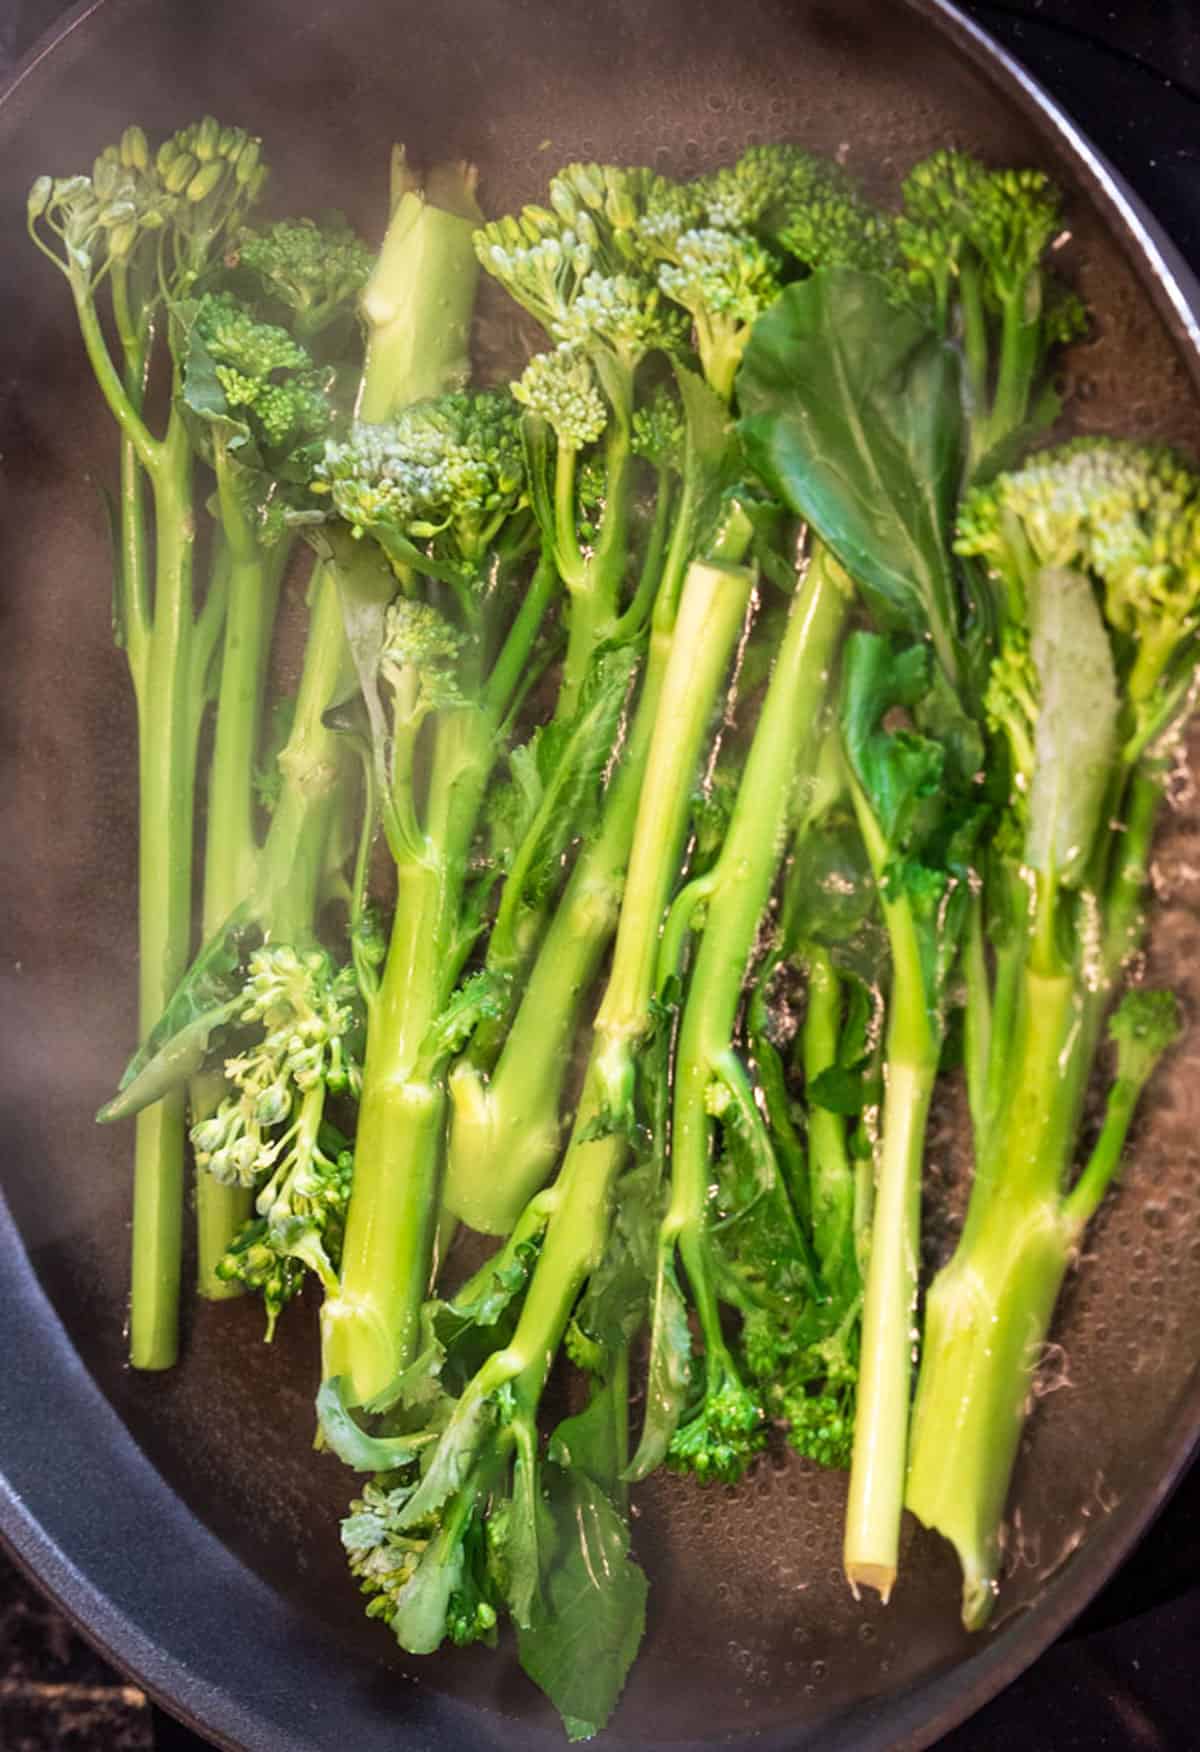 The broccoli is being blanched in a frying pan.